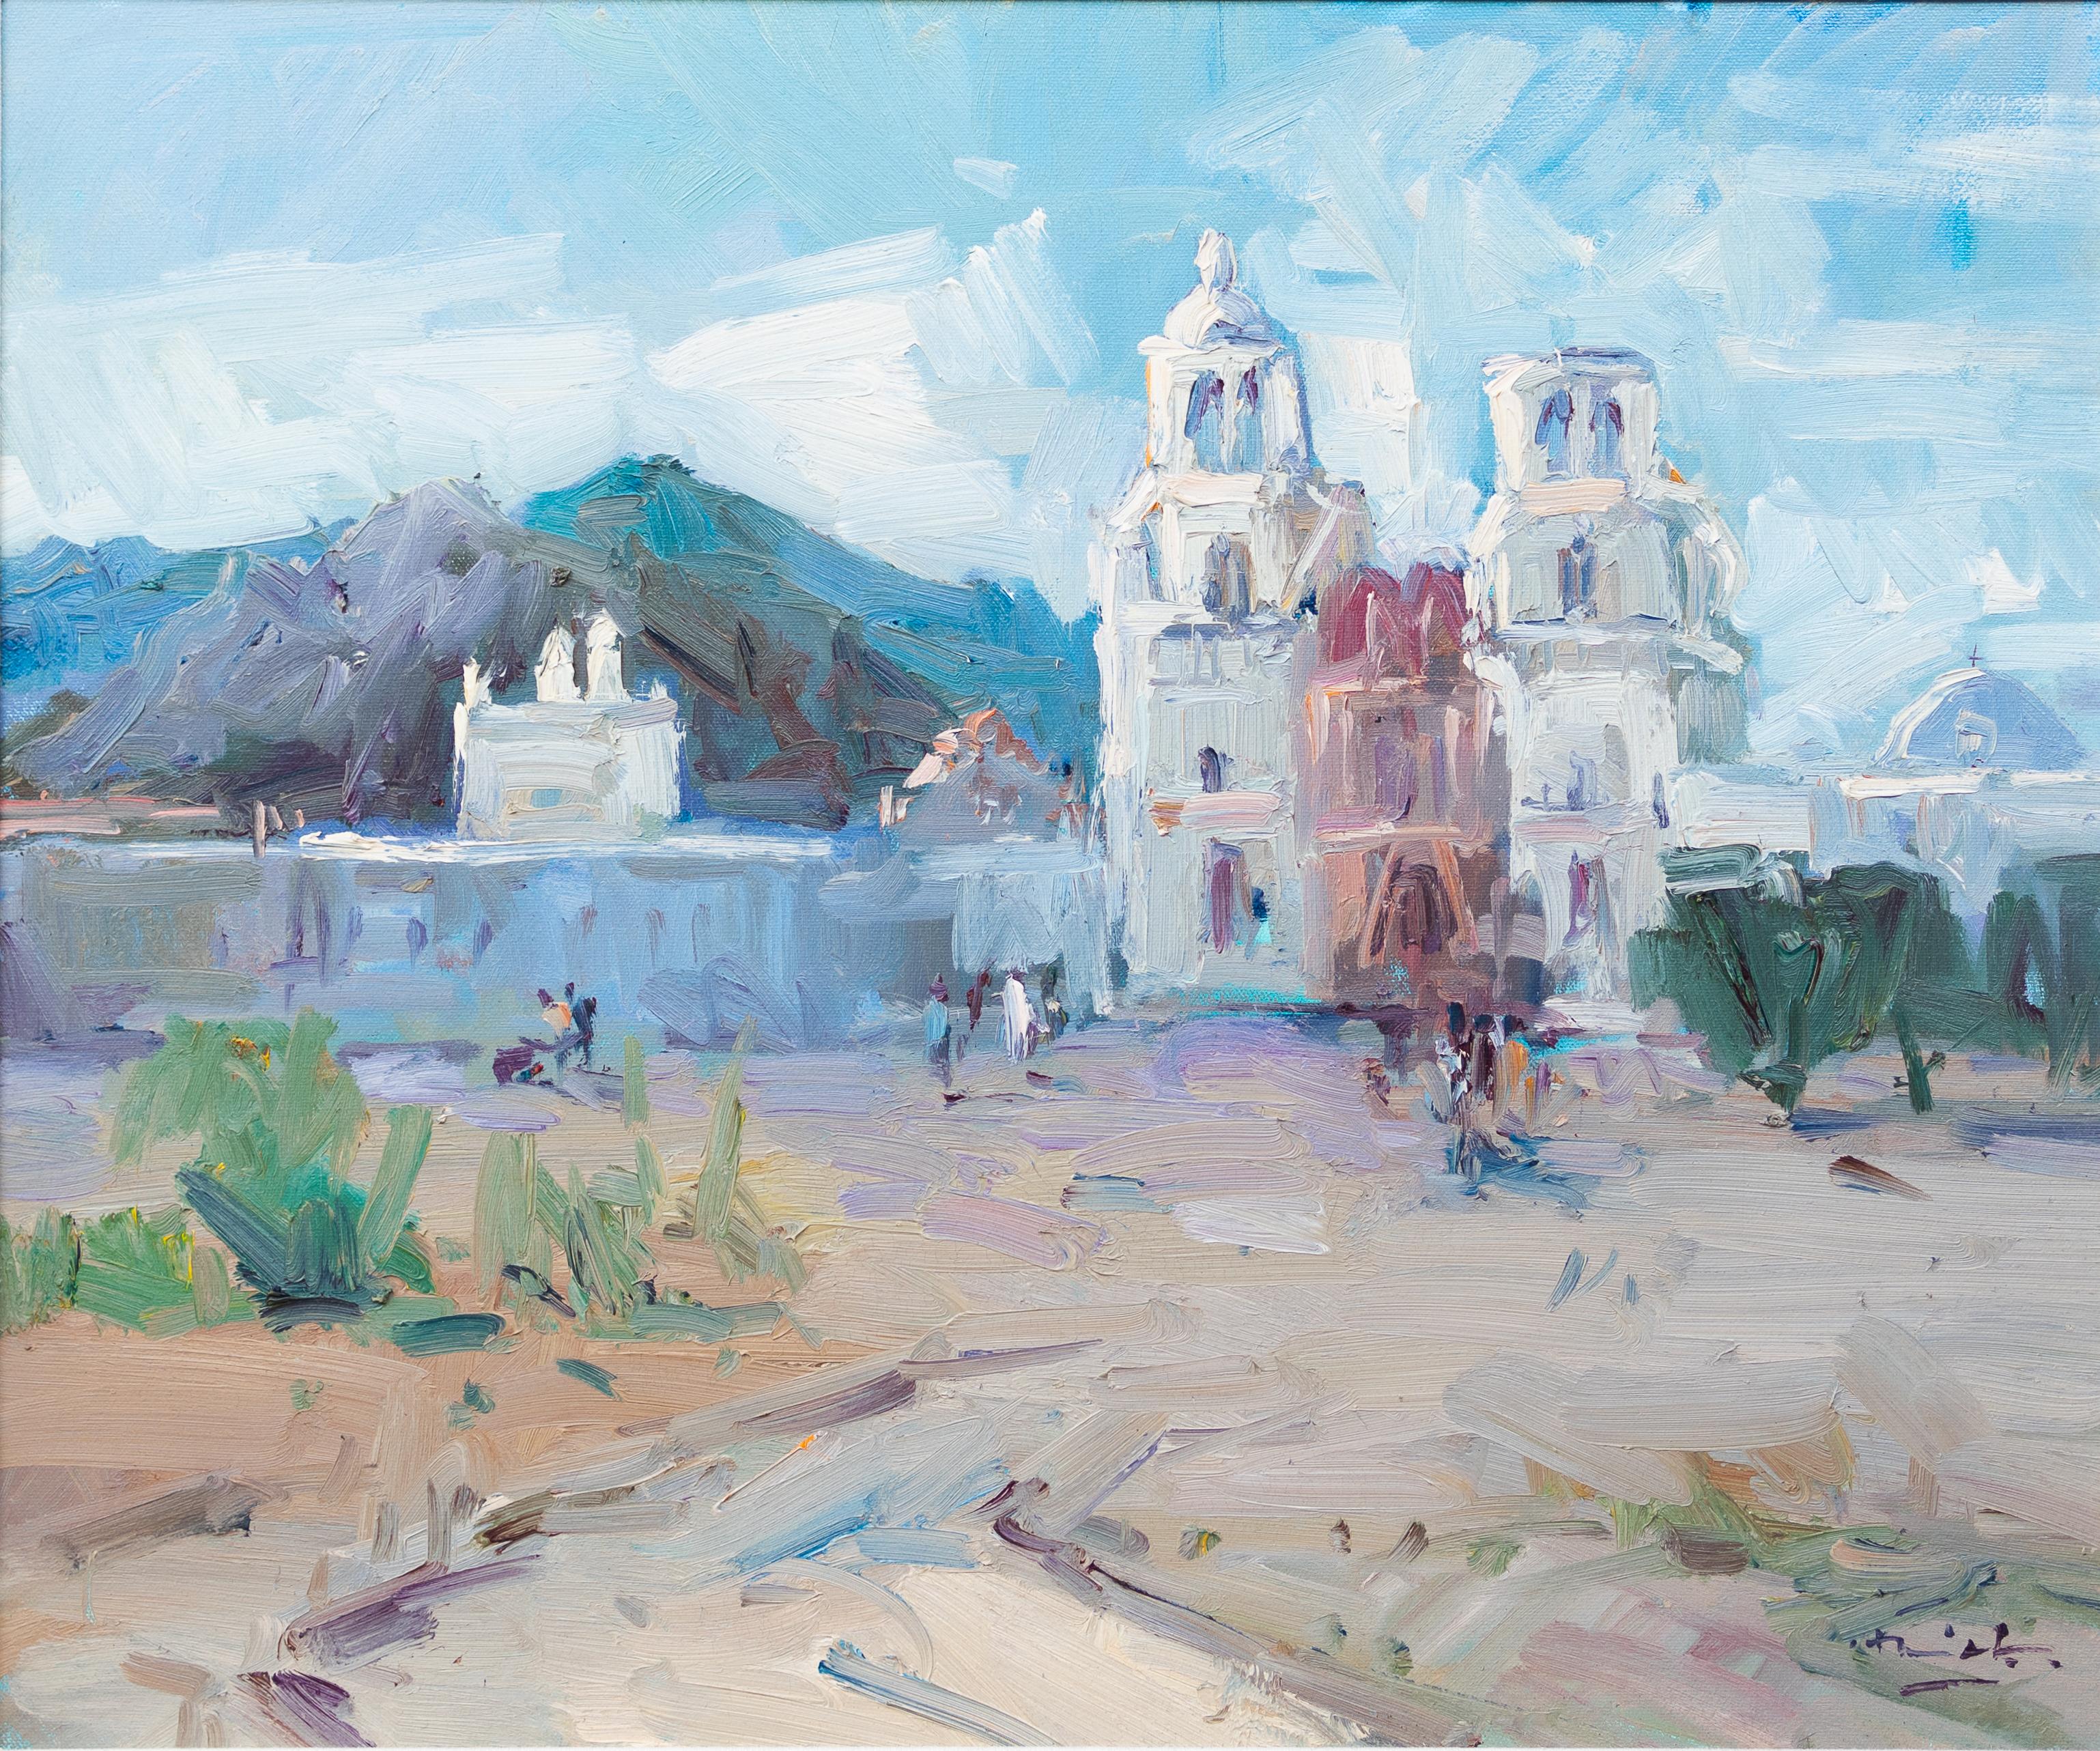 Guido Frick Landscape Painting - "The White Dove" Daytime Church Scene